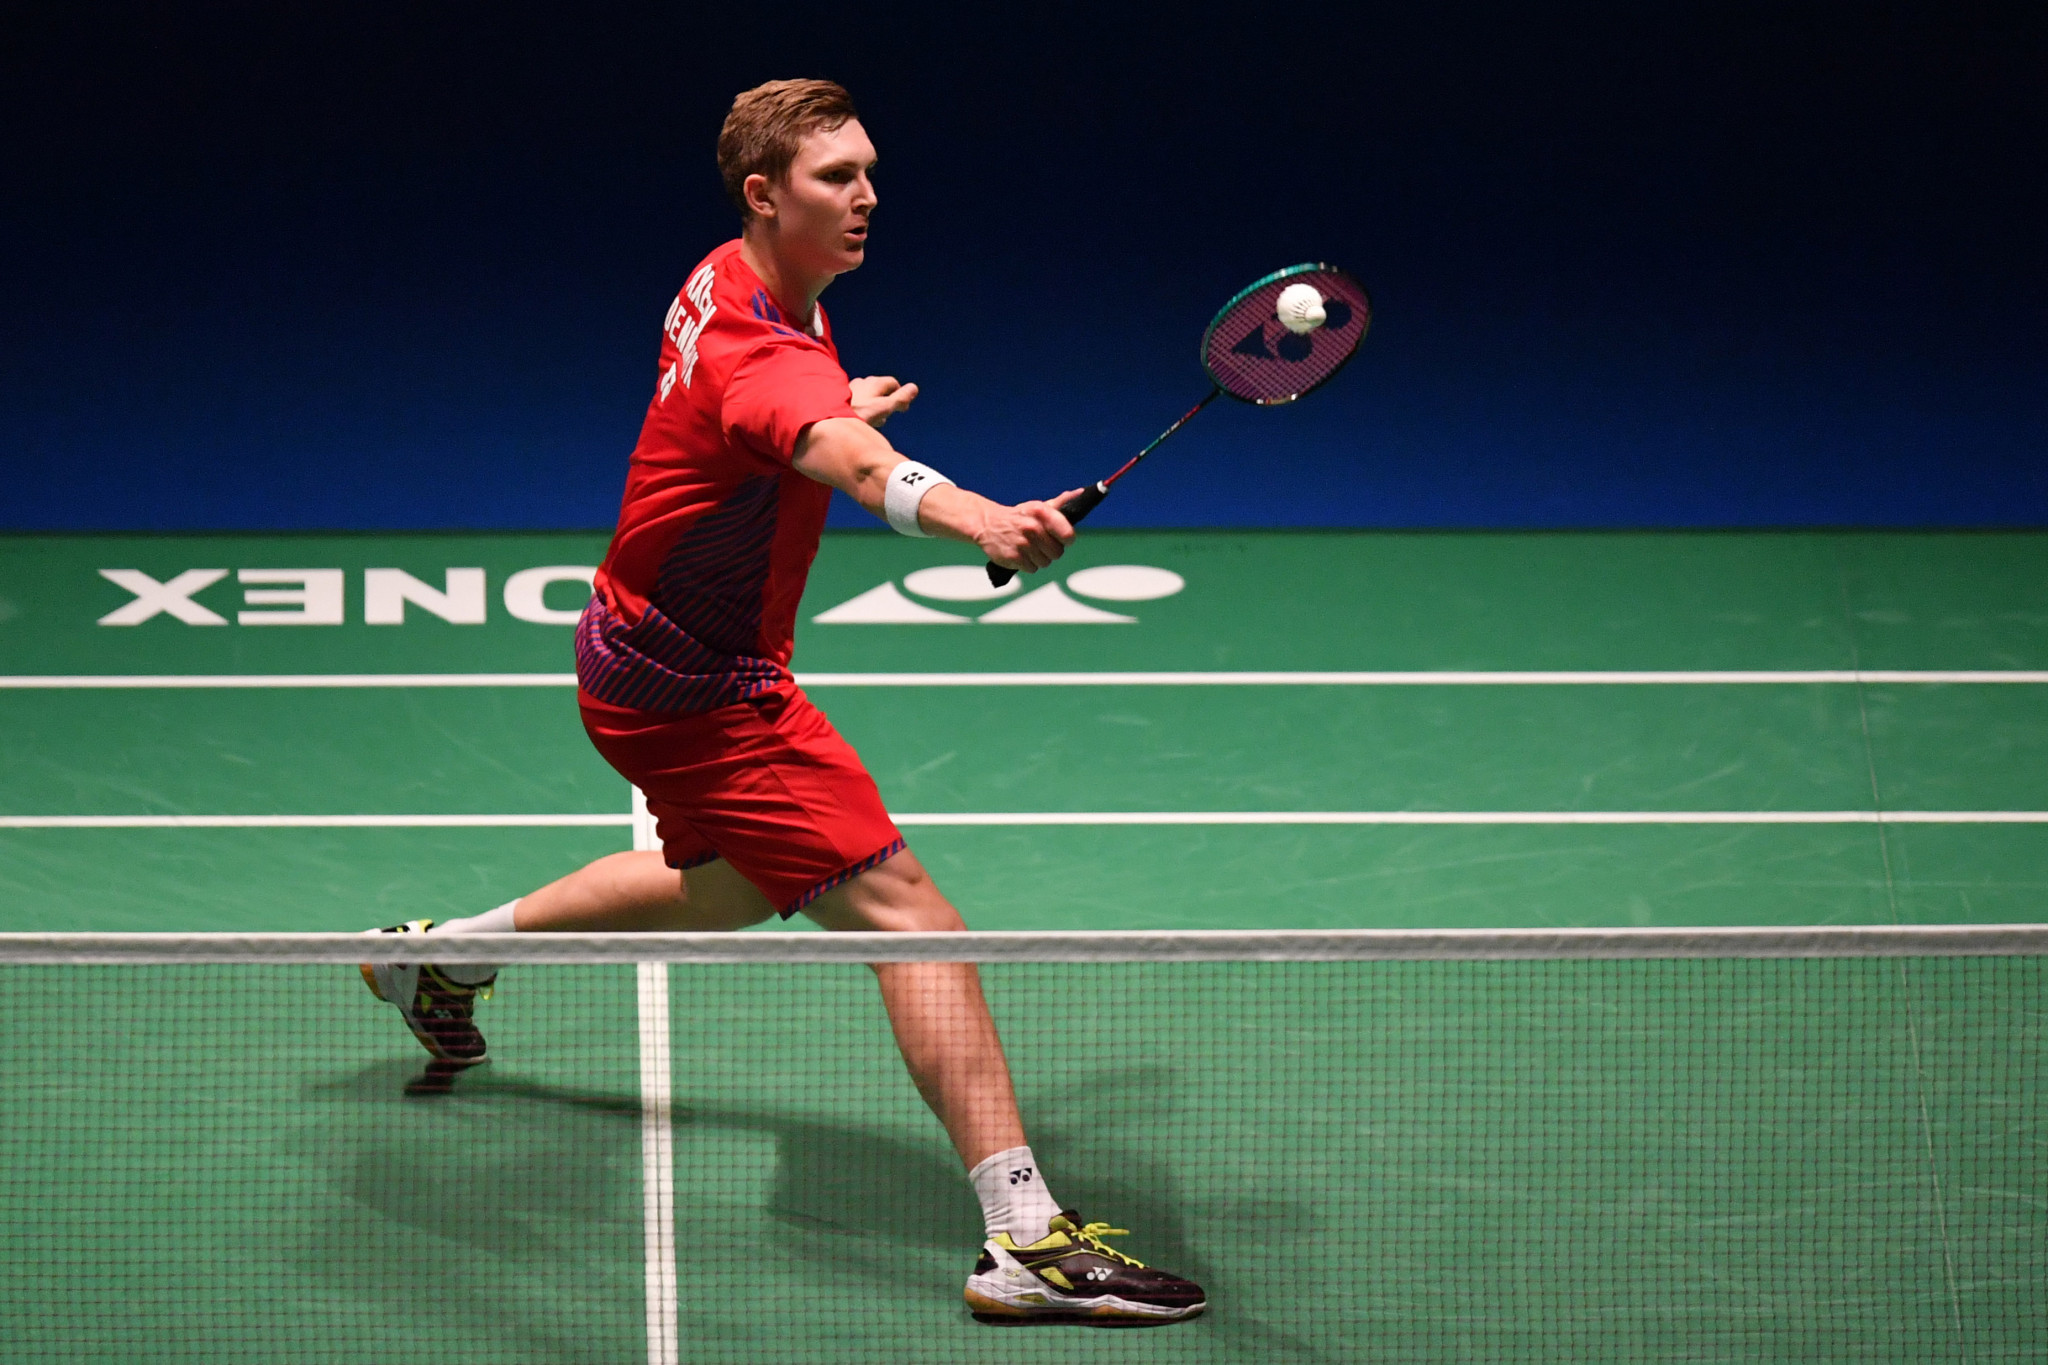 Indonesia's Ginting stuns top seed Axelsen to reach BWF China Open quarter-finals